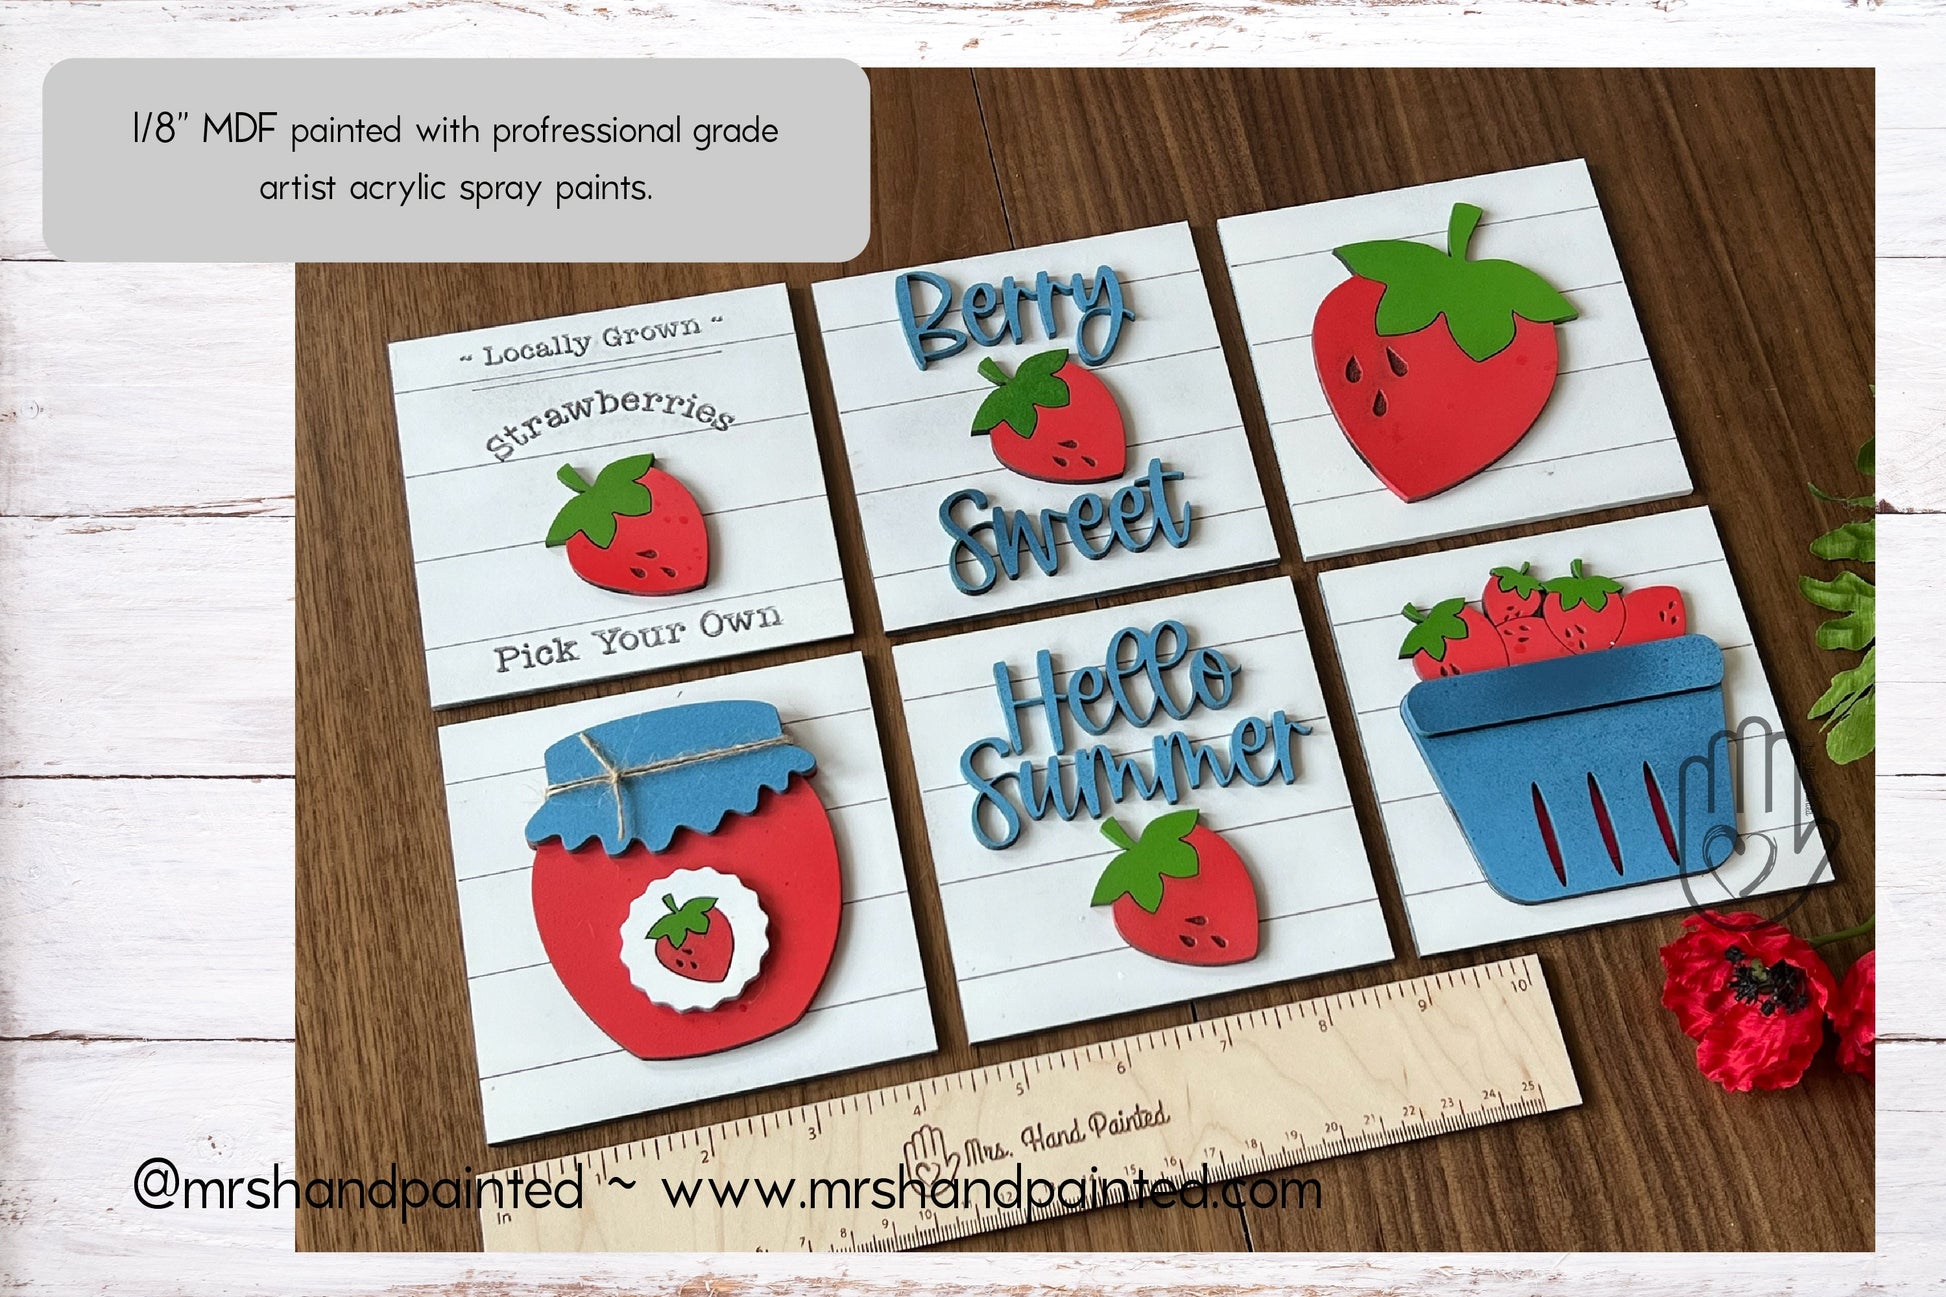 Summer Strawberry Interchangeable Signs - Laser Cut Wood Painted